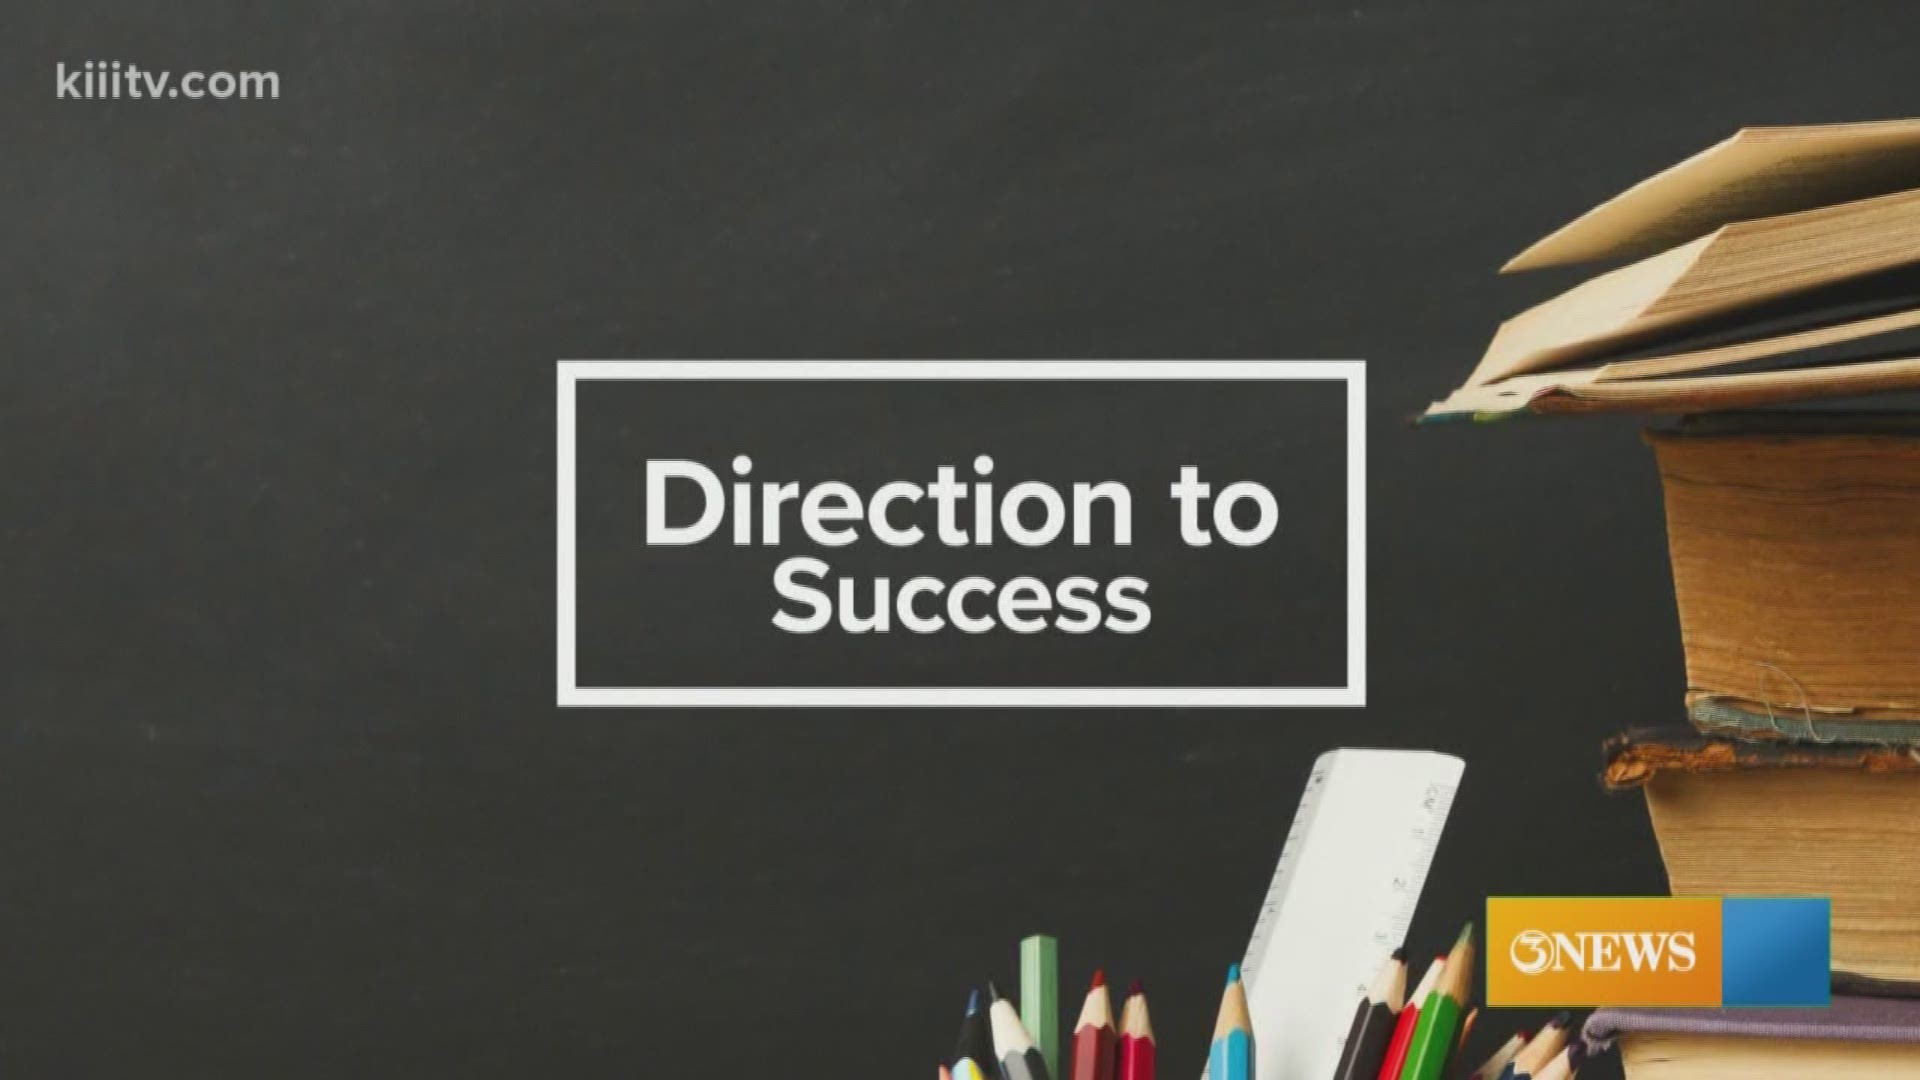 Some college and no degree? Don't worry. In this edition of Direction to Success, we talk about how you can "Recapture Your Dream" in 2020.